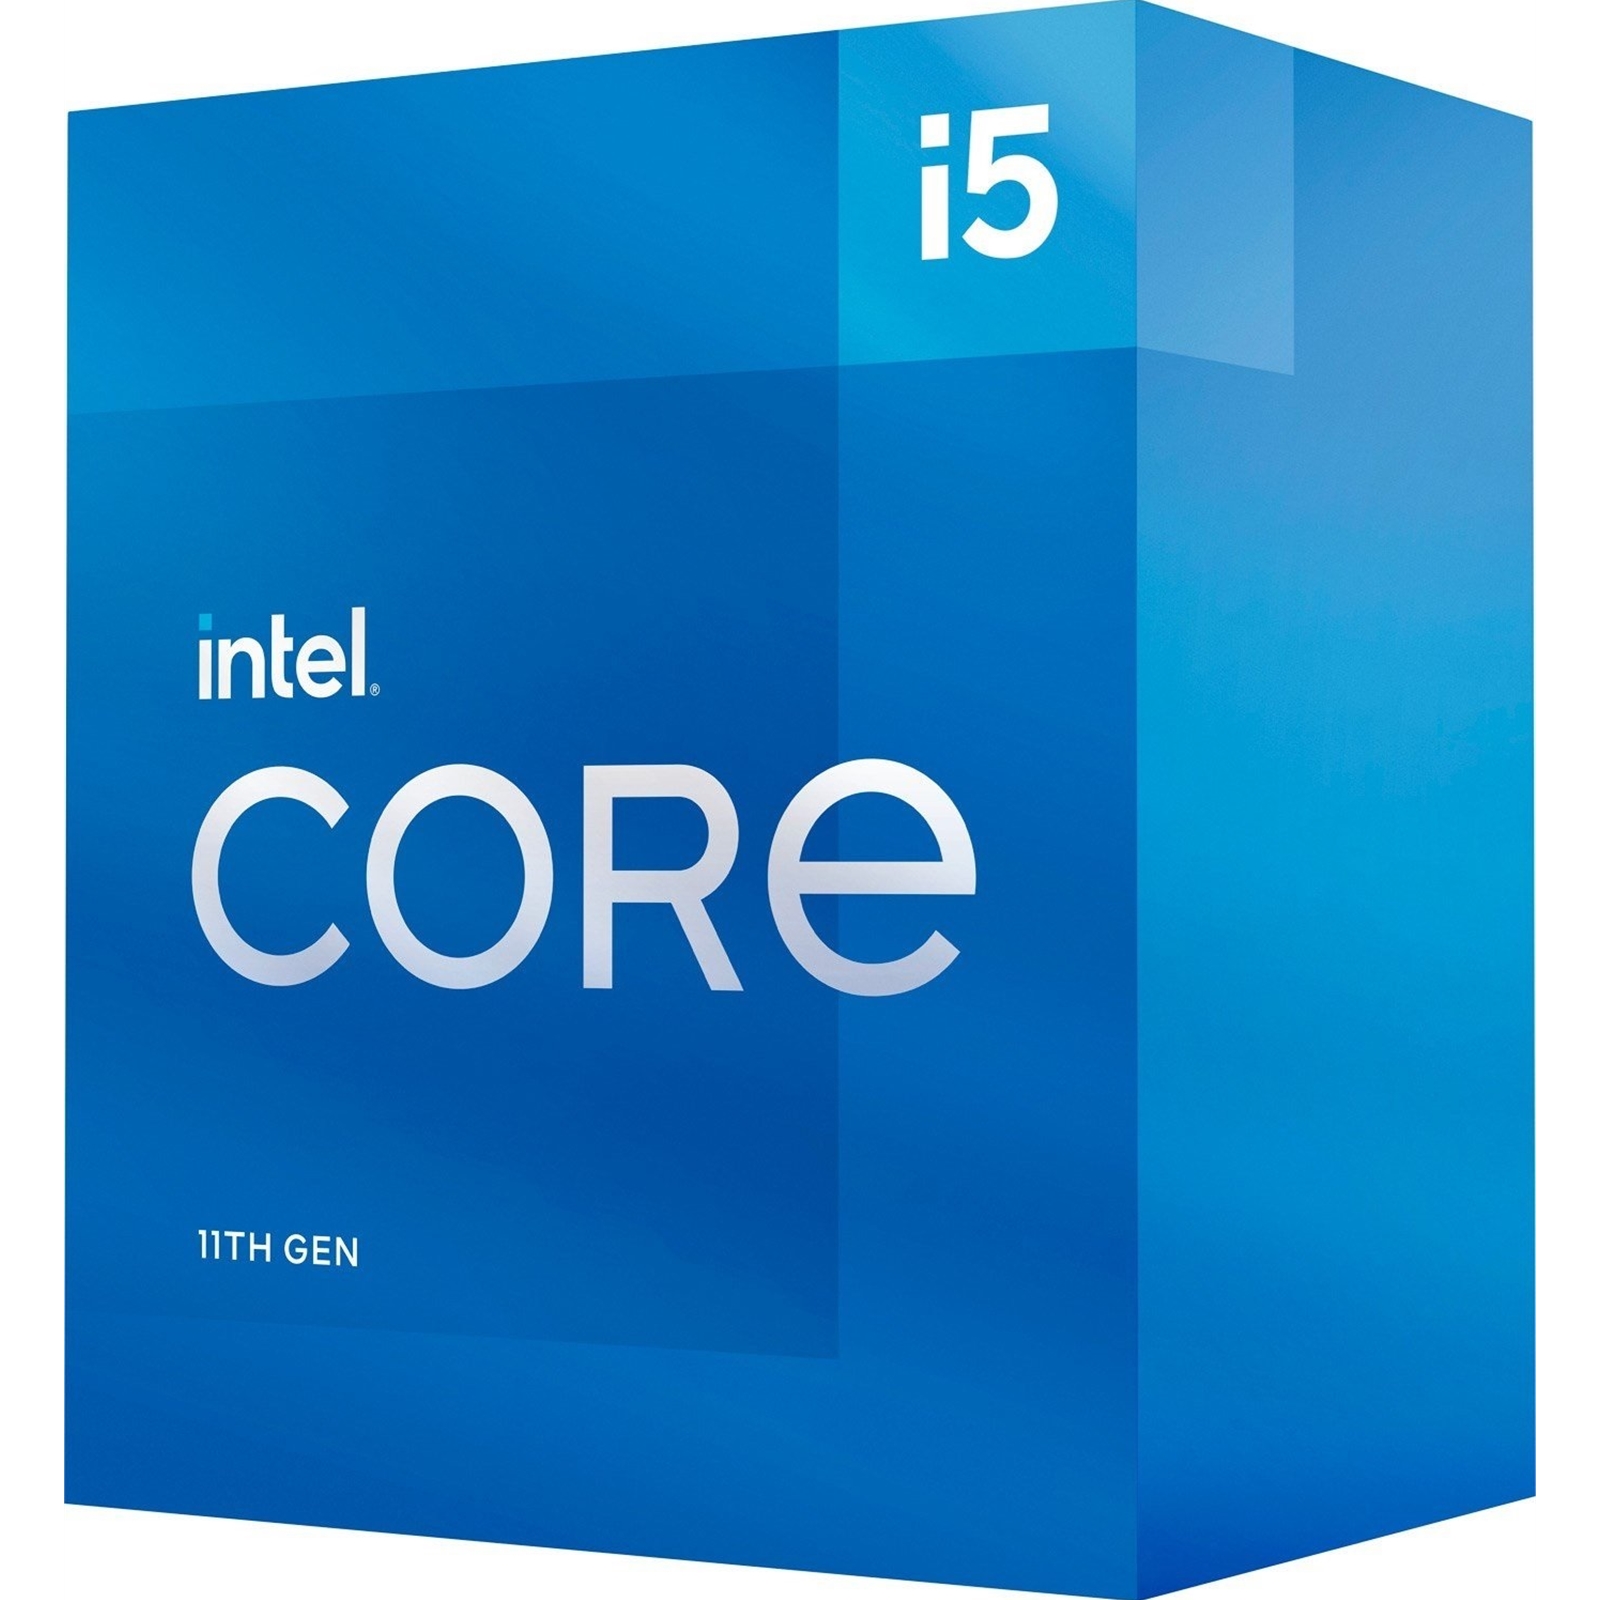 Intel Core i5-11400F 6 Core Desktop Processor 6 Threads 2.6GHz up to 4.4GHz Turbo